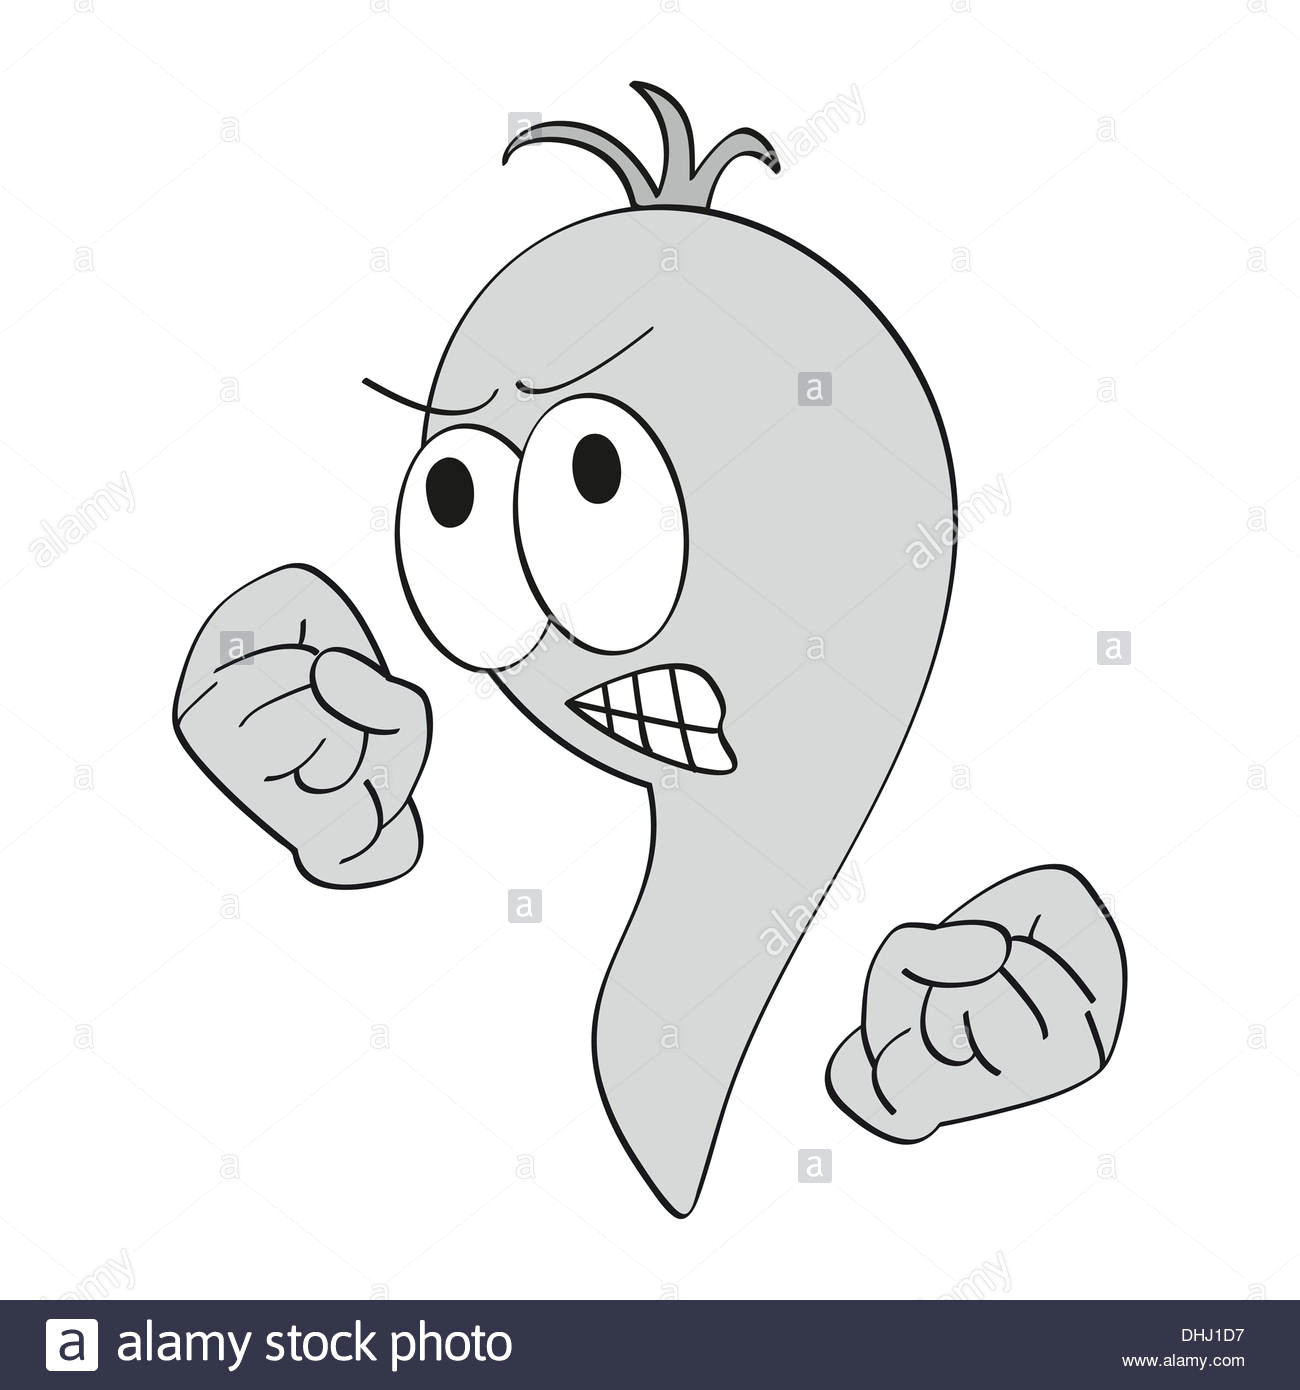 gray cartoon worm design vector illustration with different emotions stock image